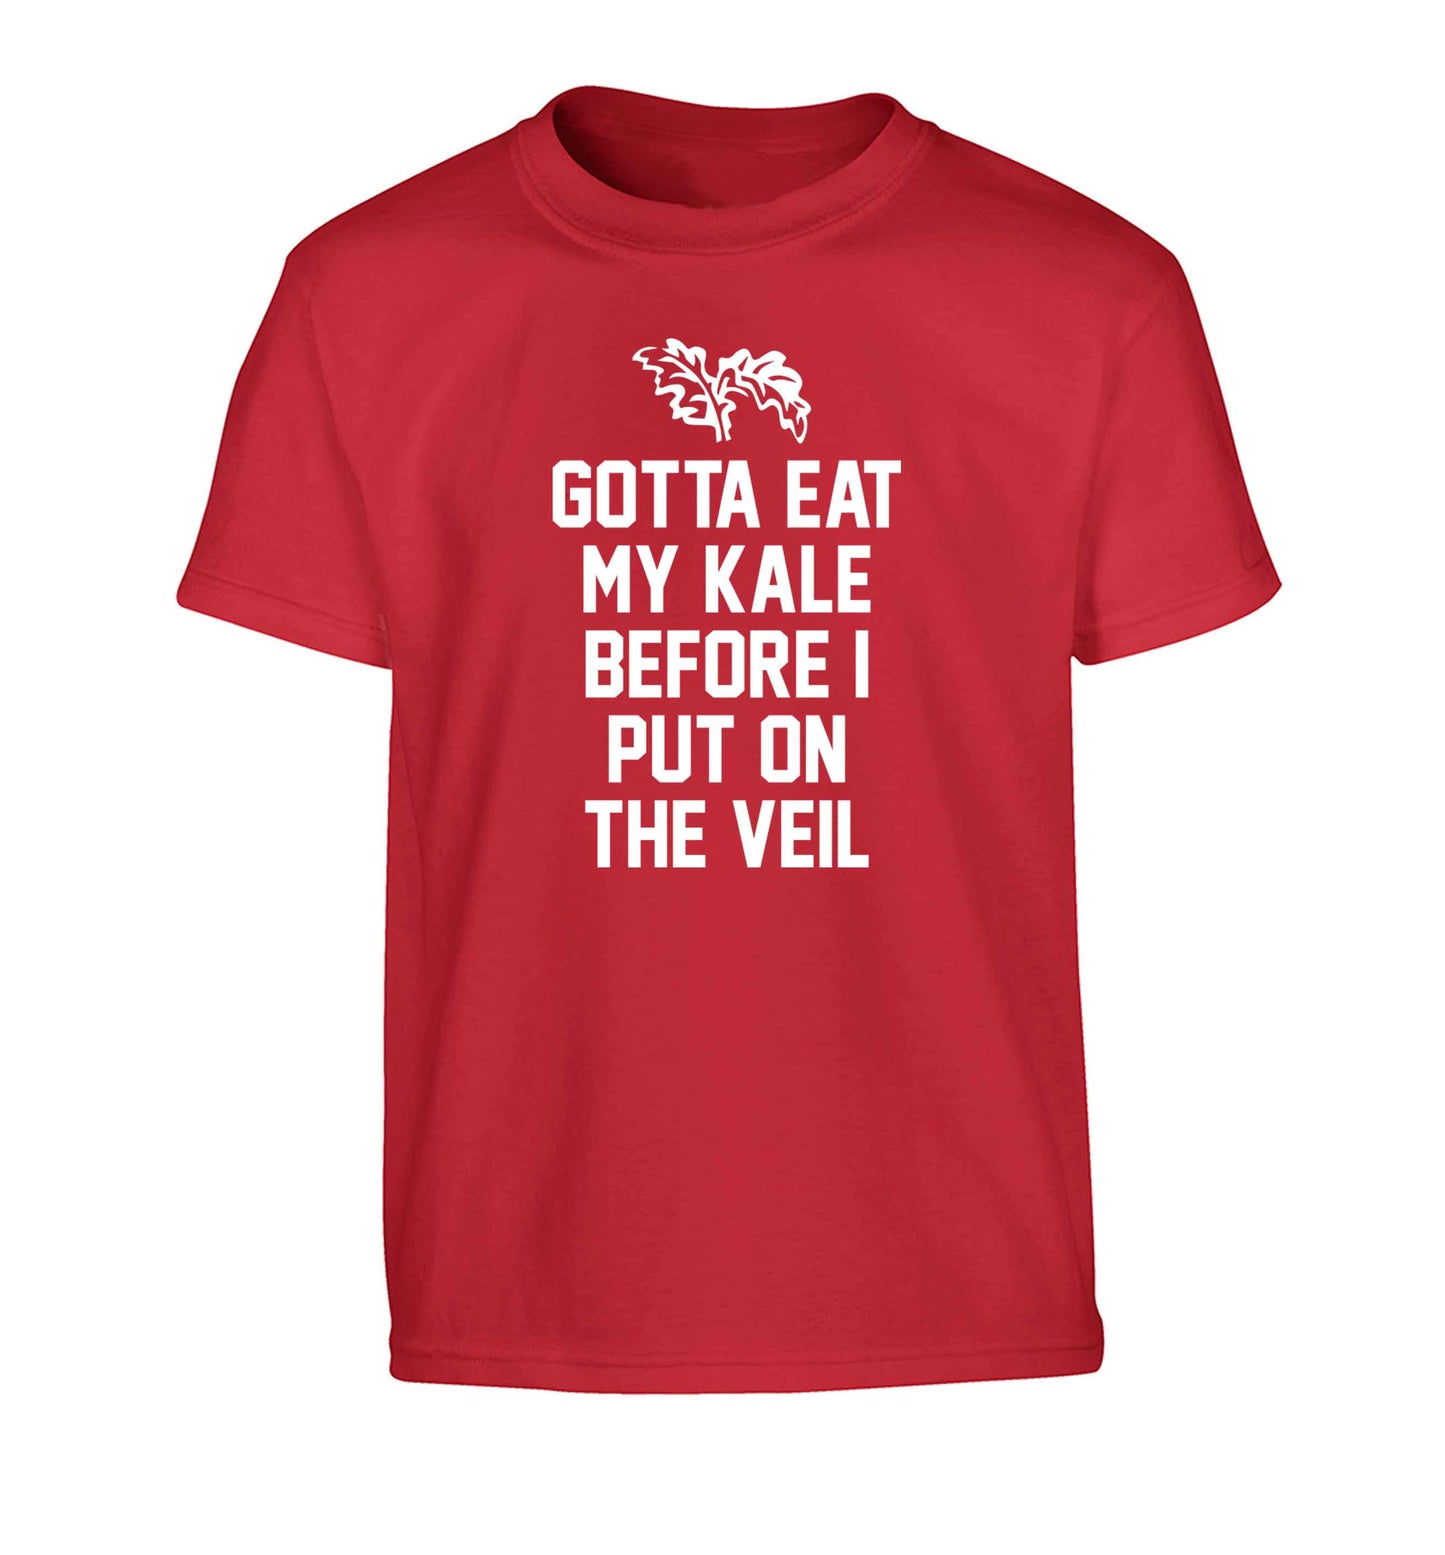 Gotta eat my kale before I put on the veil Children's red Tshirt 12-13 Years